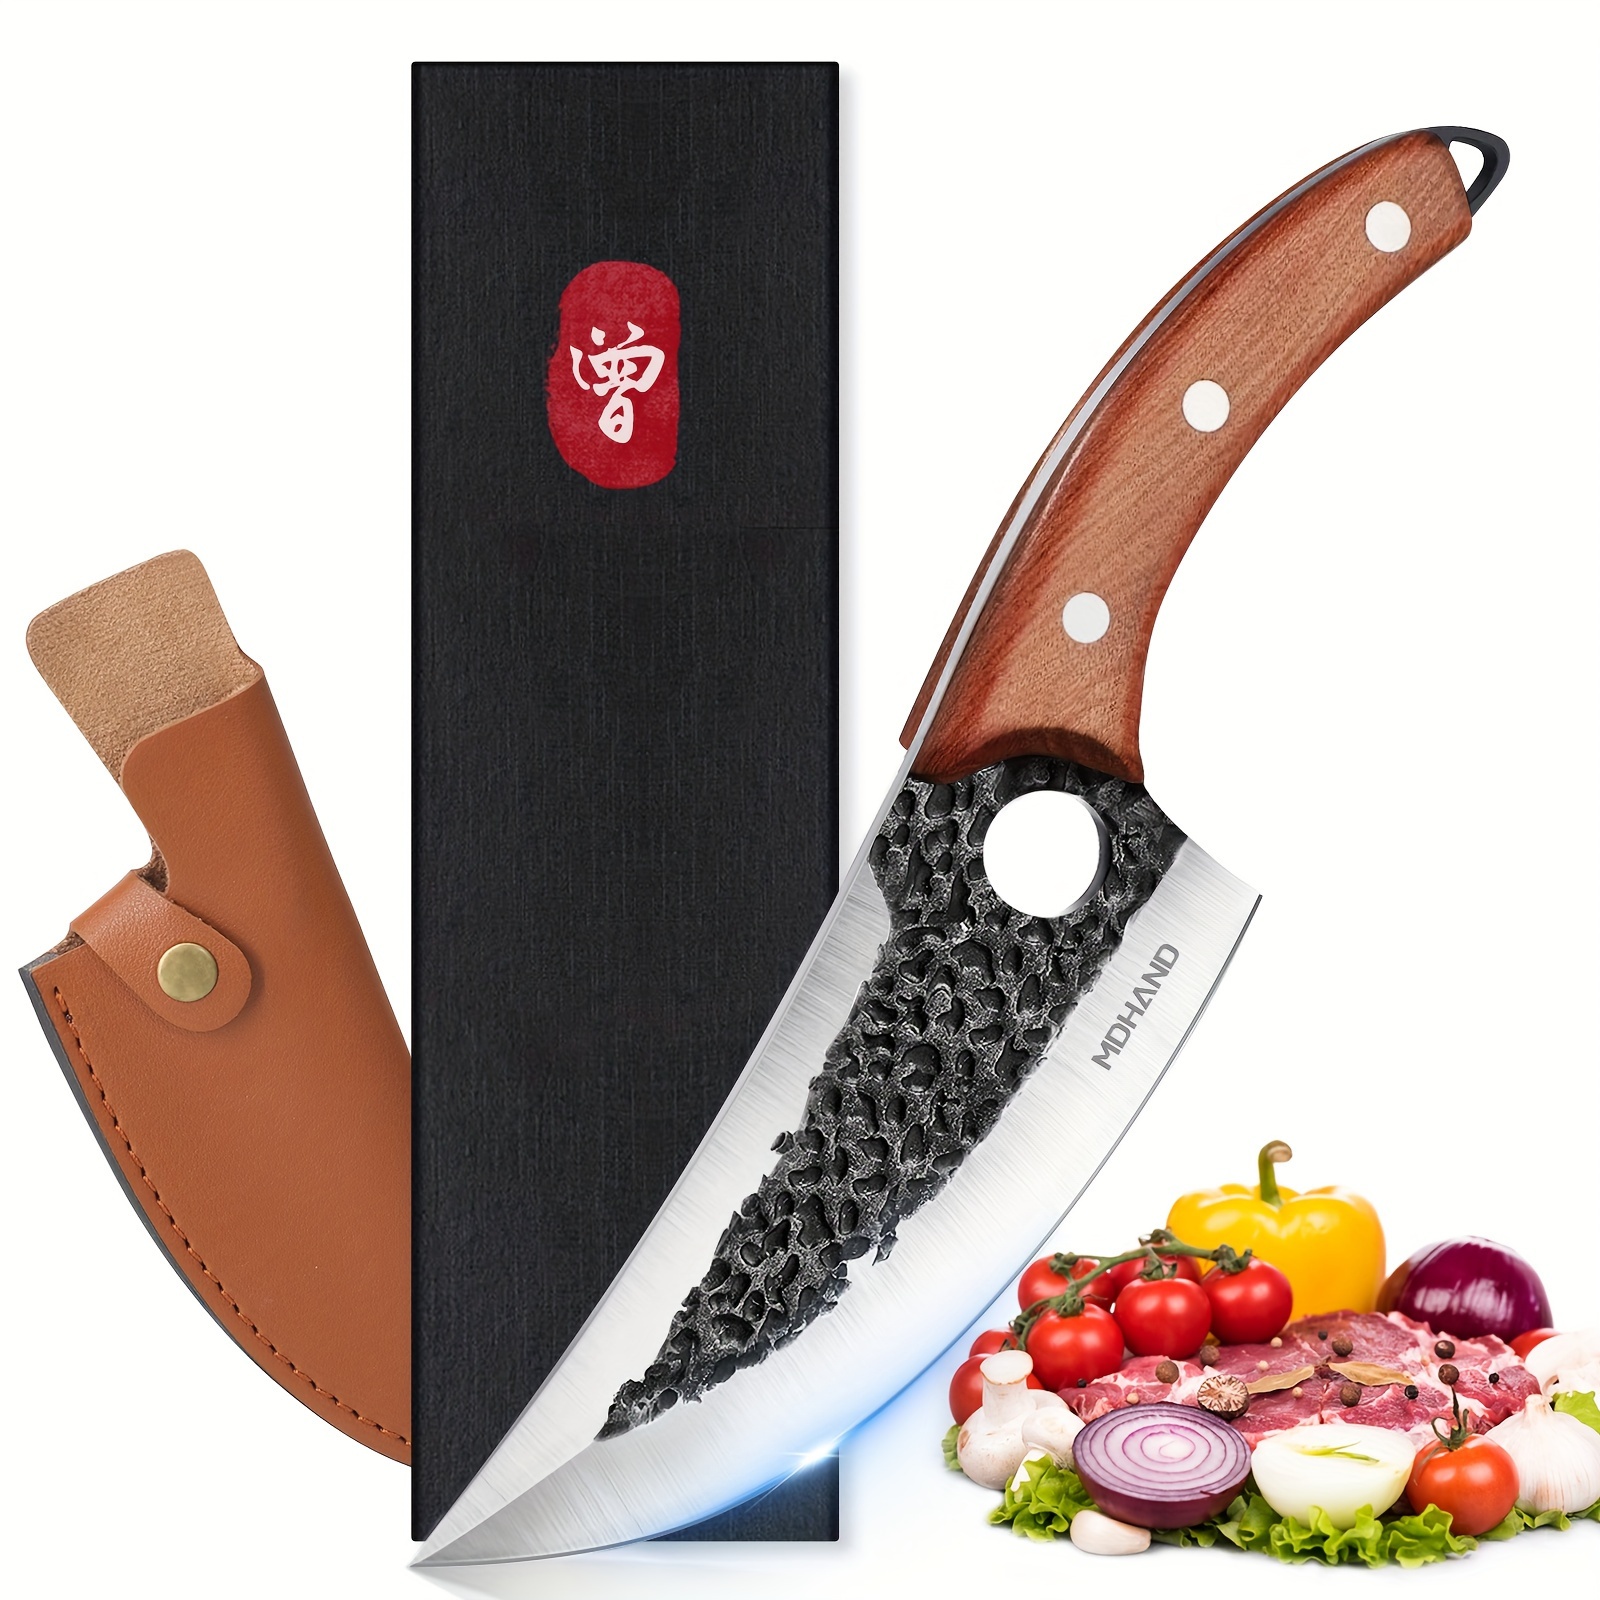 

Knife Japan Kitchen Upgraded Viking Knives With Sheath Hand Forged Butcher For Meat Cutting Japanese Cooking Sharp Cleaver Chef And Outdoor Camping, Bbq